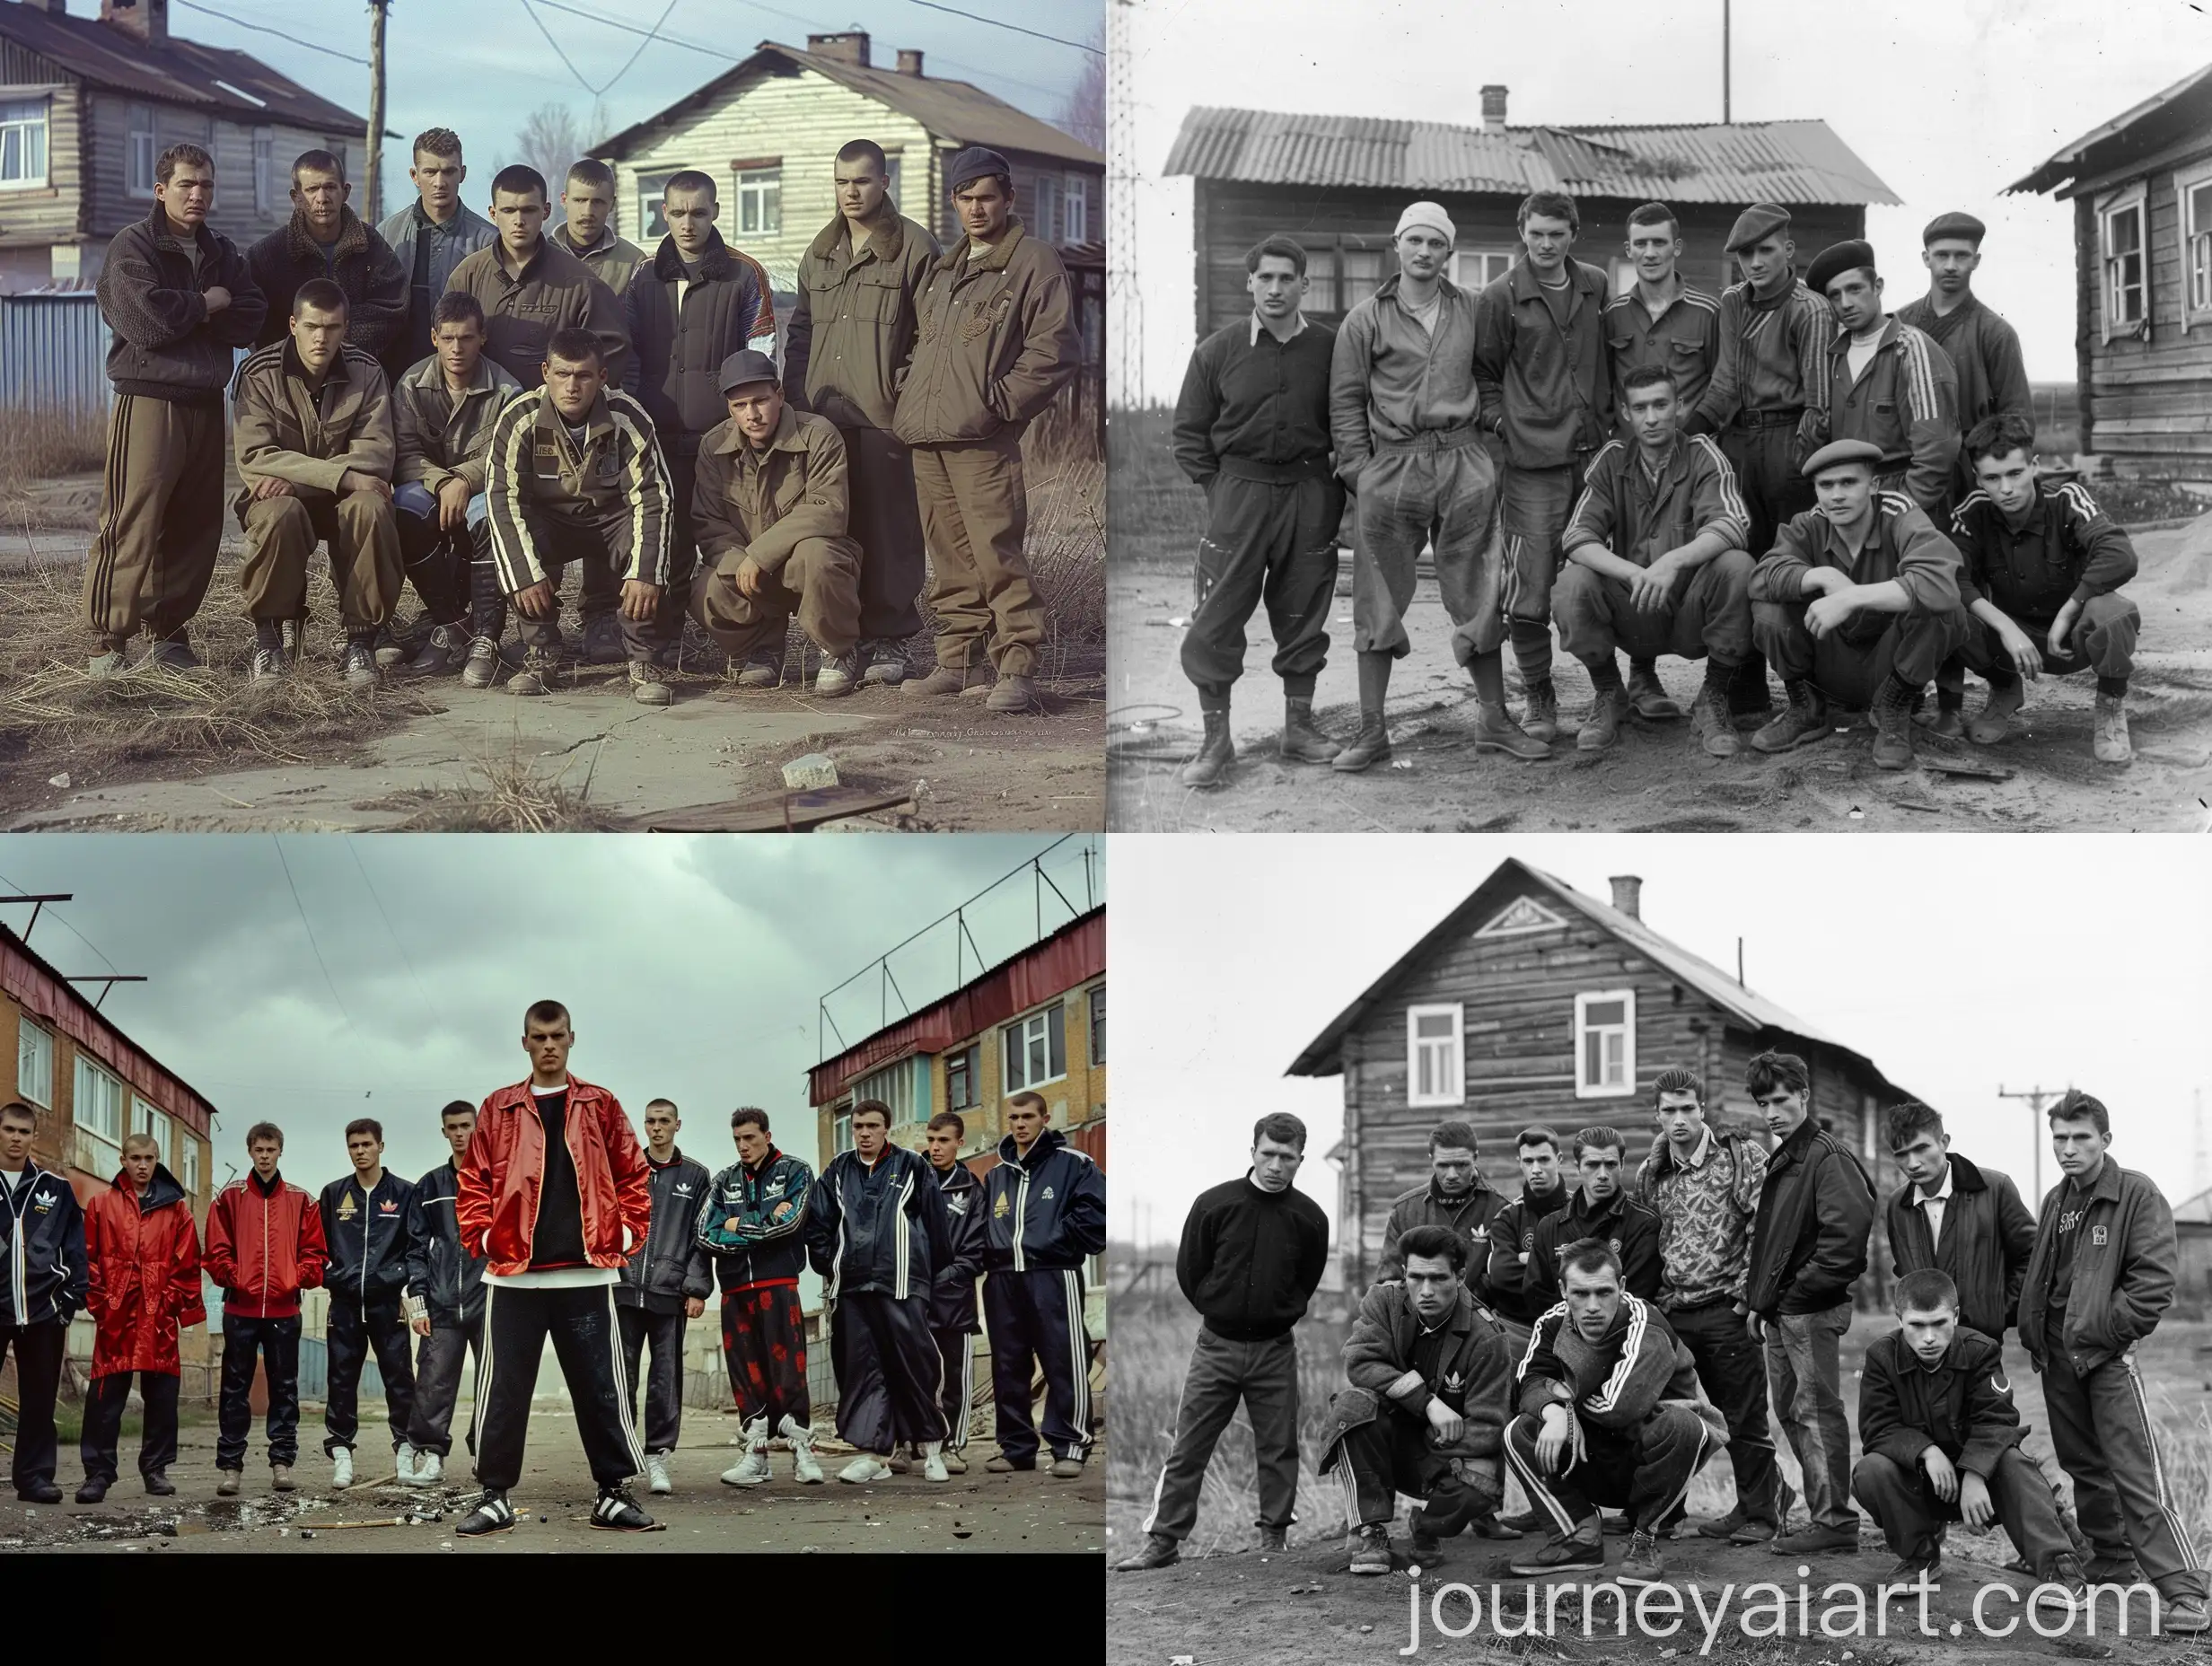 Group-of-Thirteen-Men-in-Sporty-Adidas-Suits-Soviet-Paneled-Houses-Background